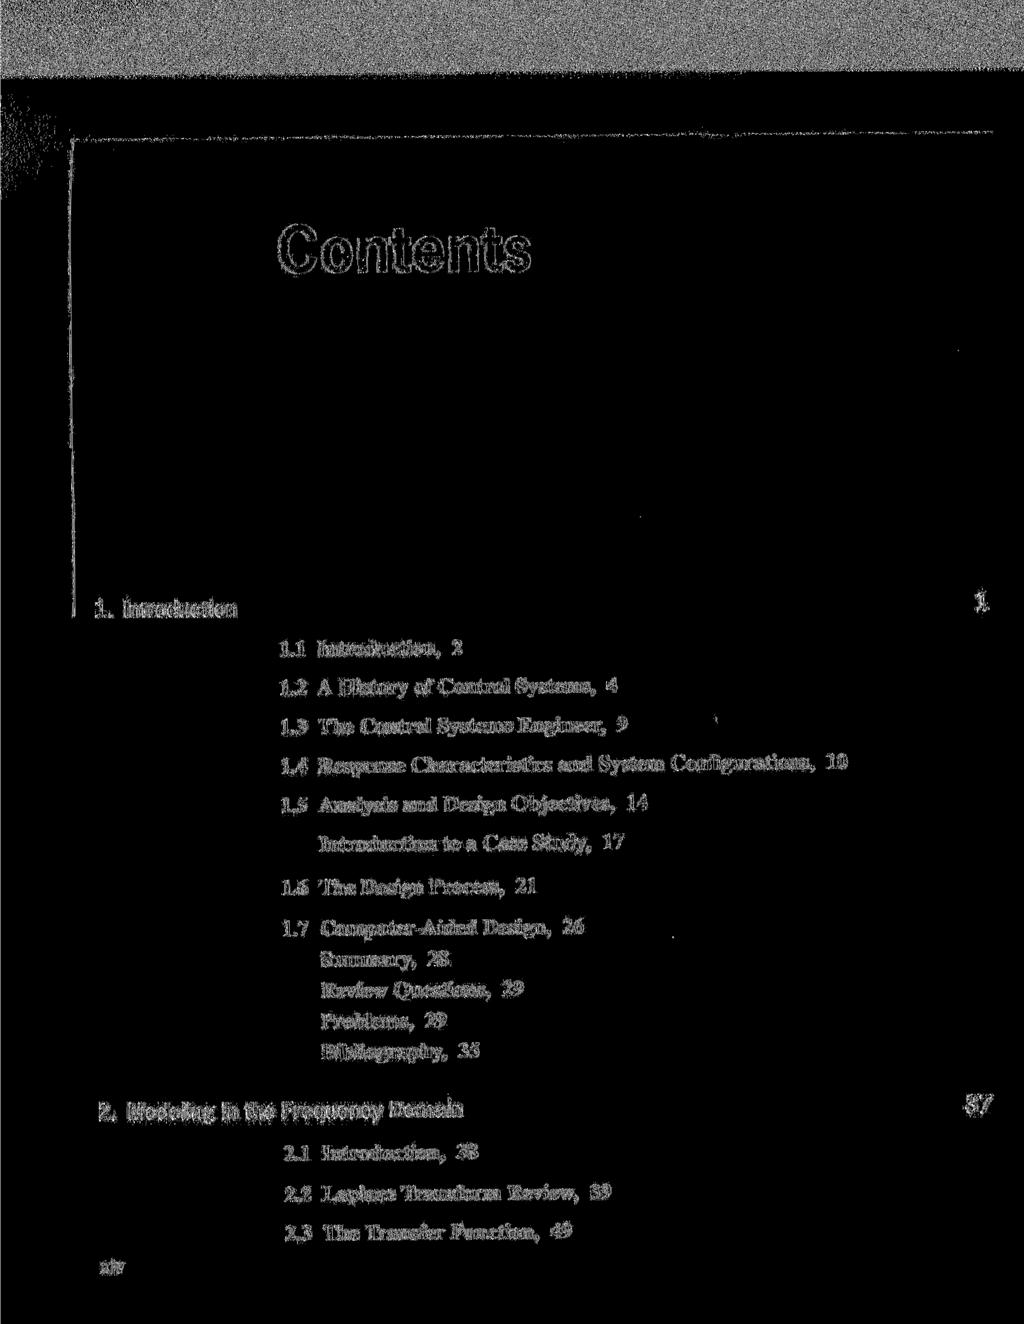 Contents 1. Introduction 1 1.1 Introduction, 2 1.2 A History of Control Systems, 4 1.3 The Control Systems Engineer, 9 1.4 Response Characteristics and System Configurations, 10 1.